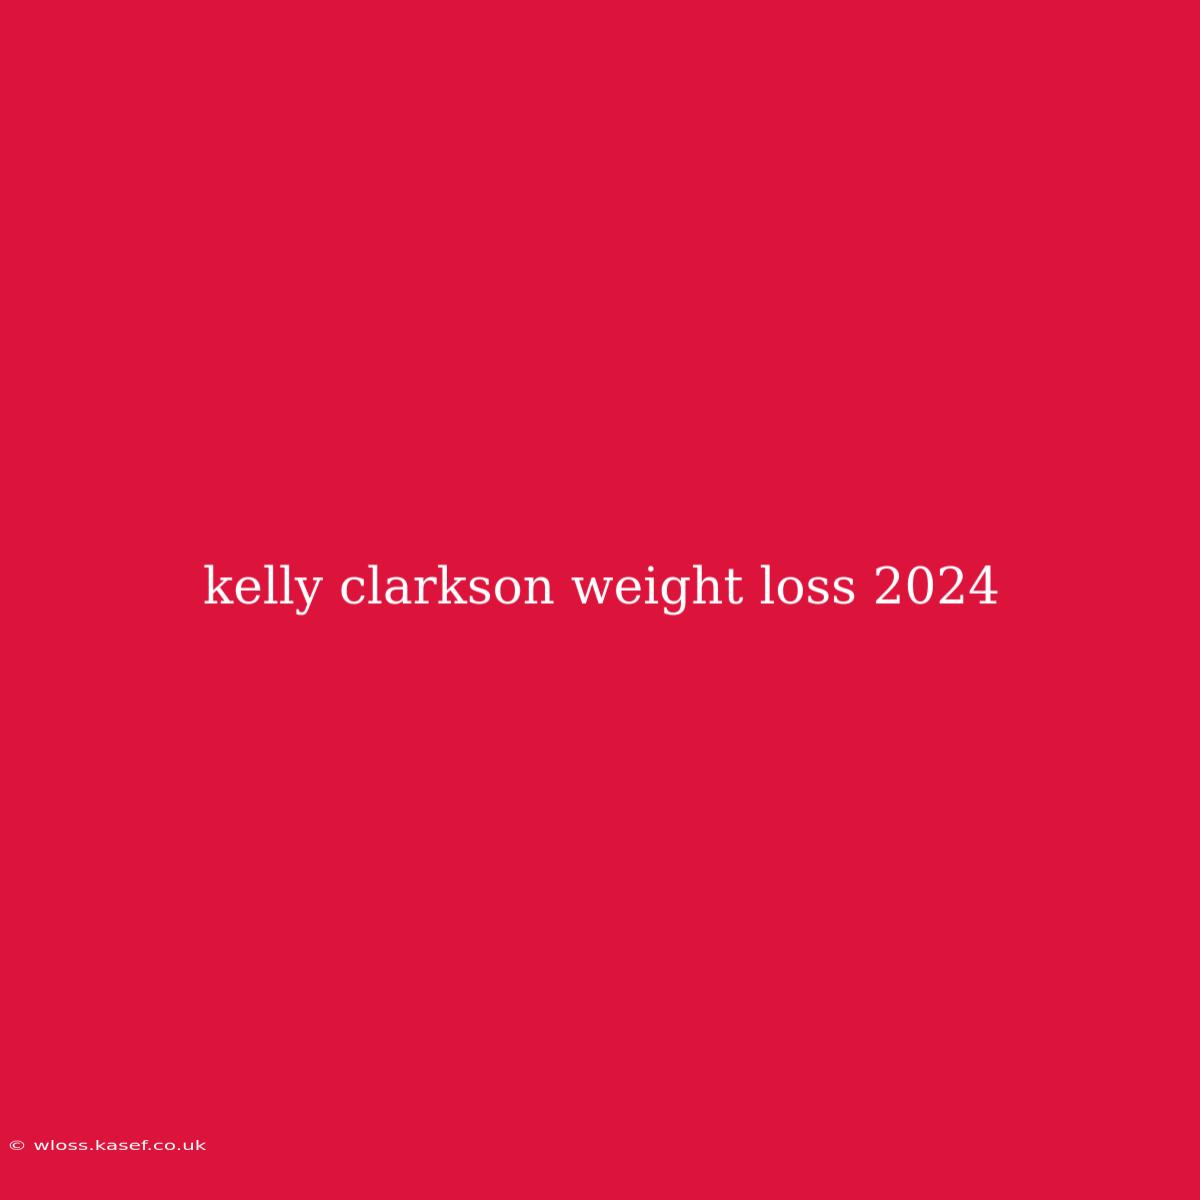 Kelly Clarkson Weight Loss 2024